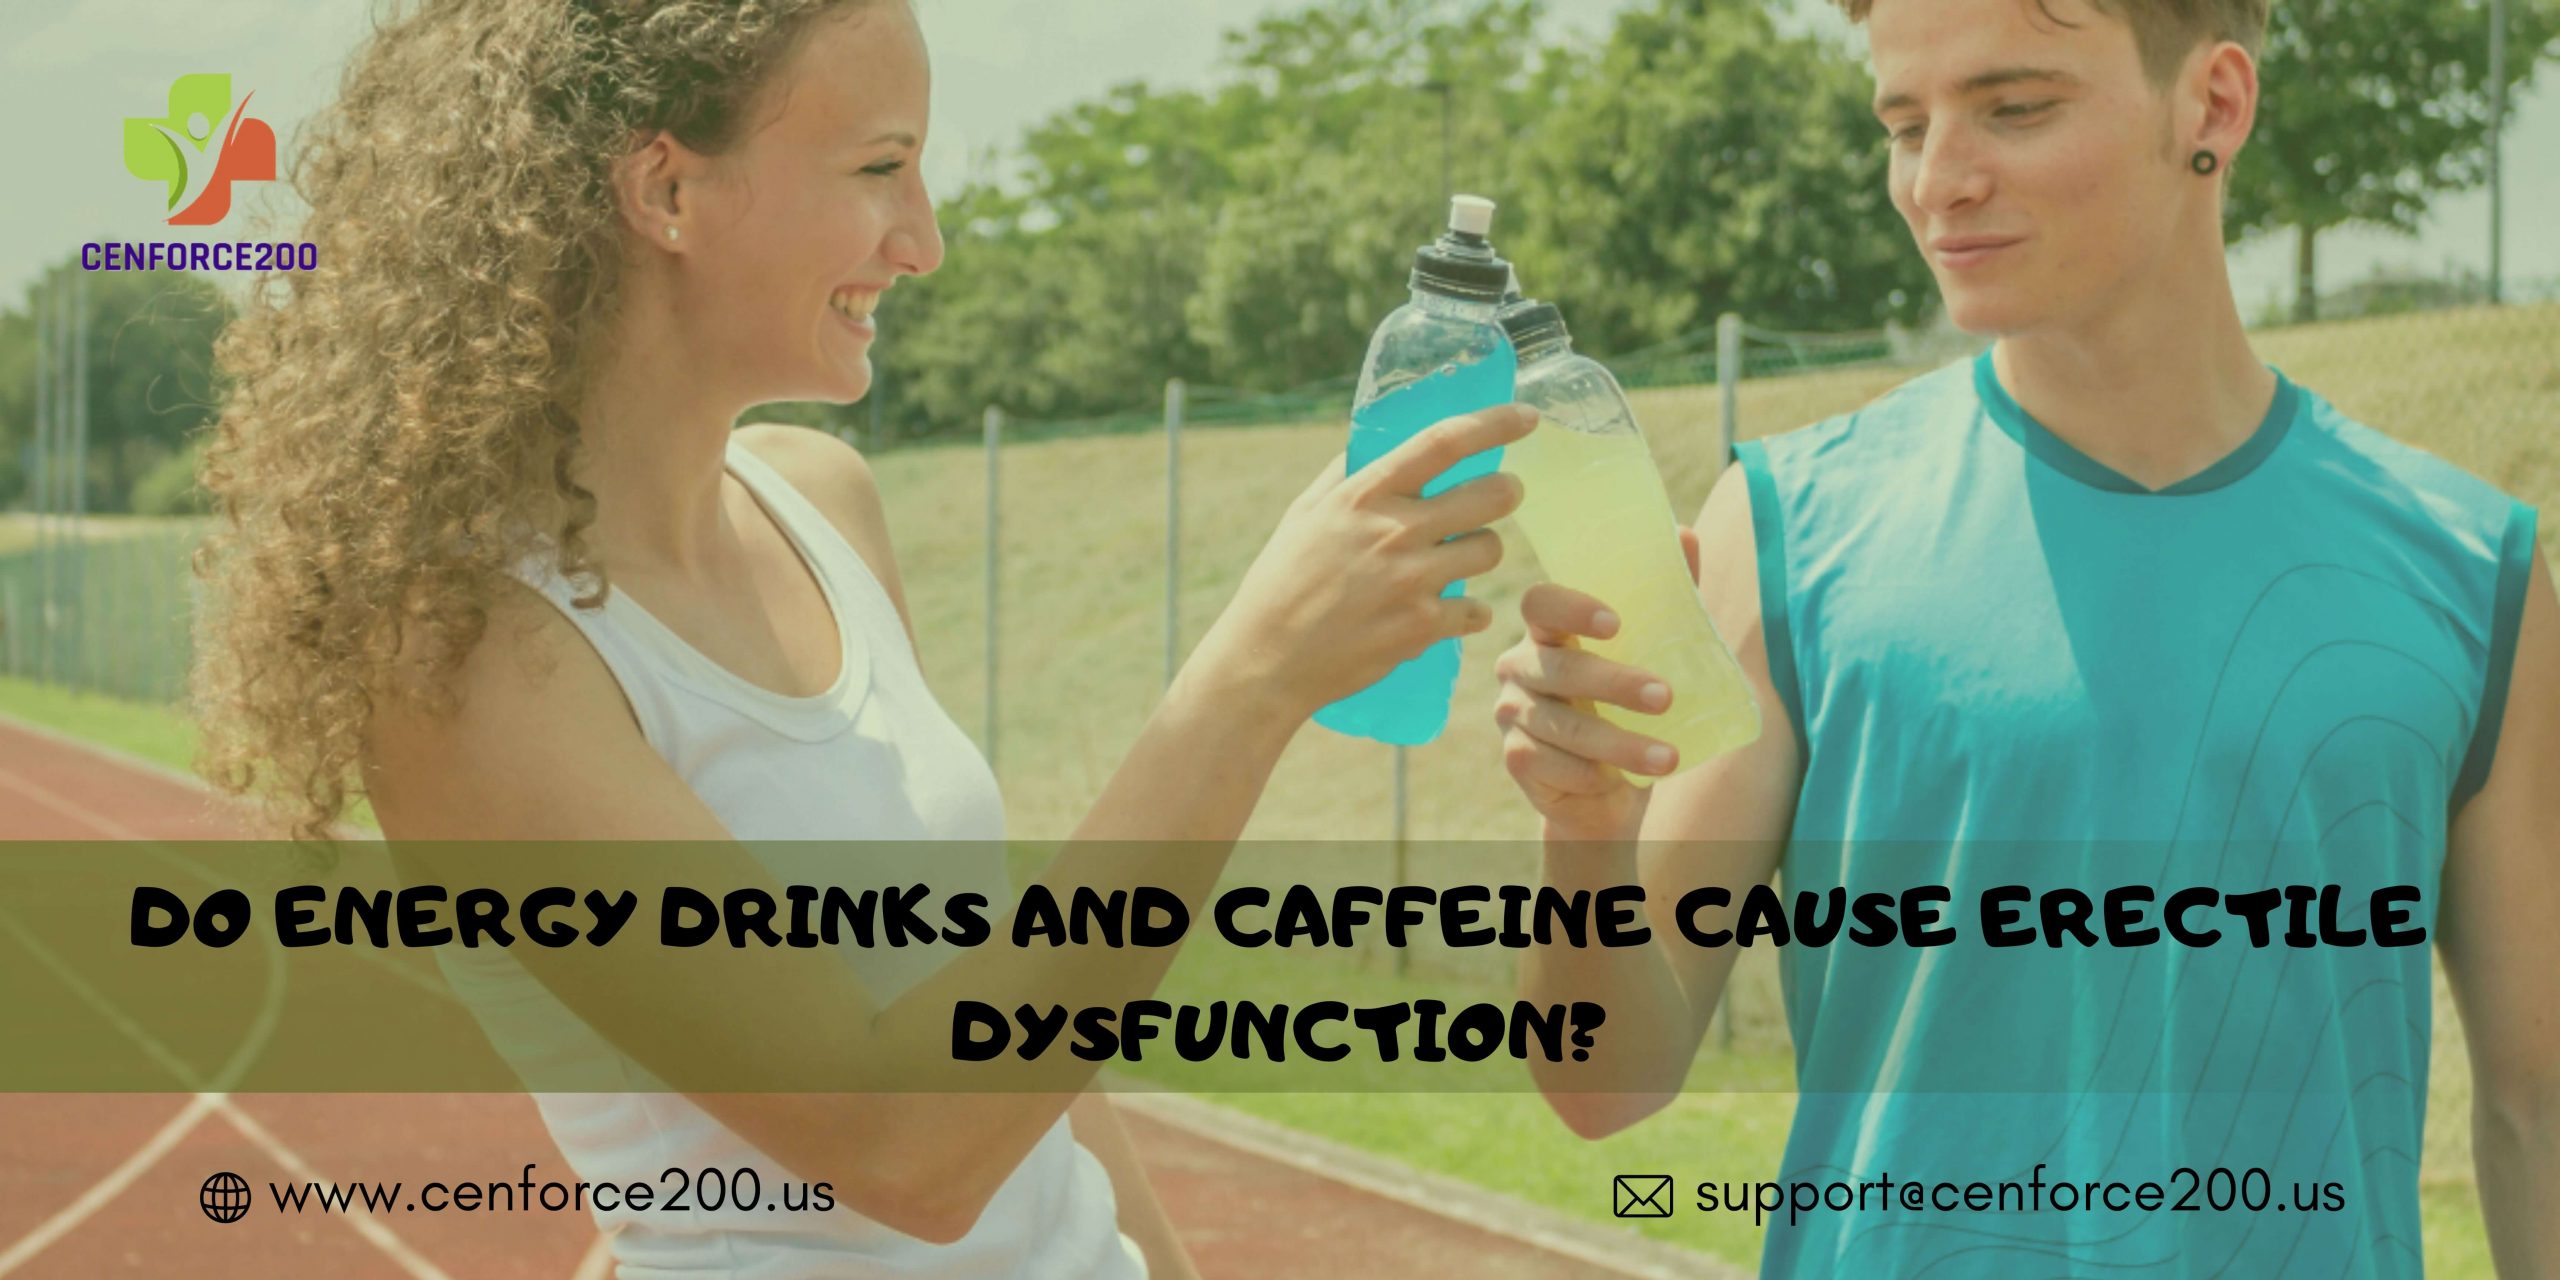 Do Energy Drinks And Caffeine Cause Erectile Dysfunction?